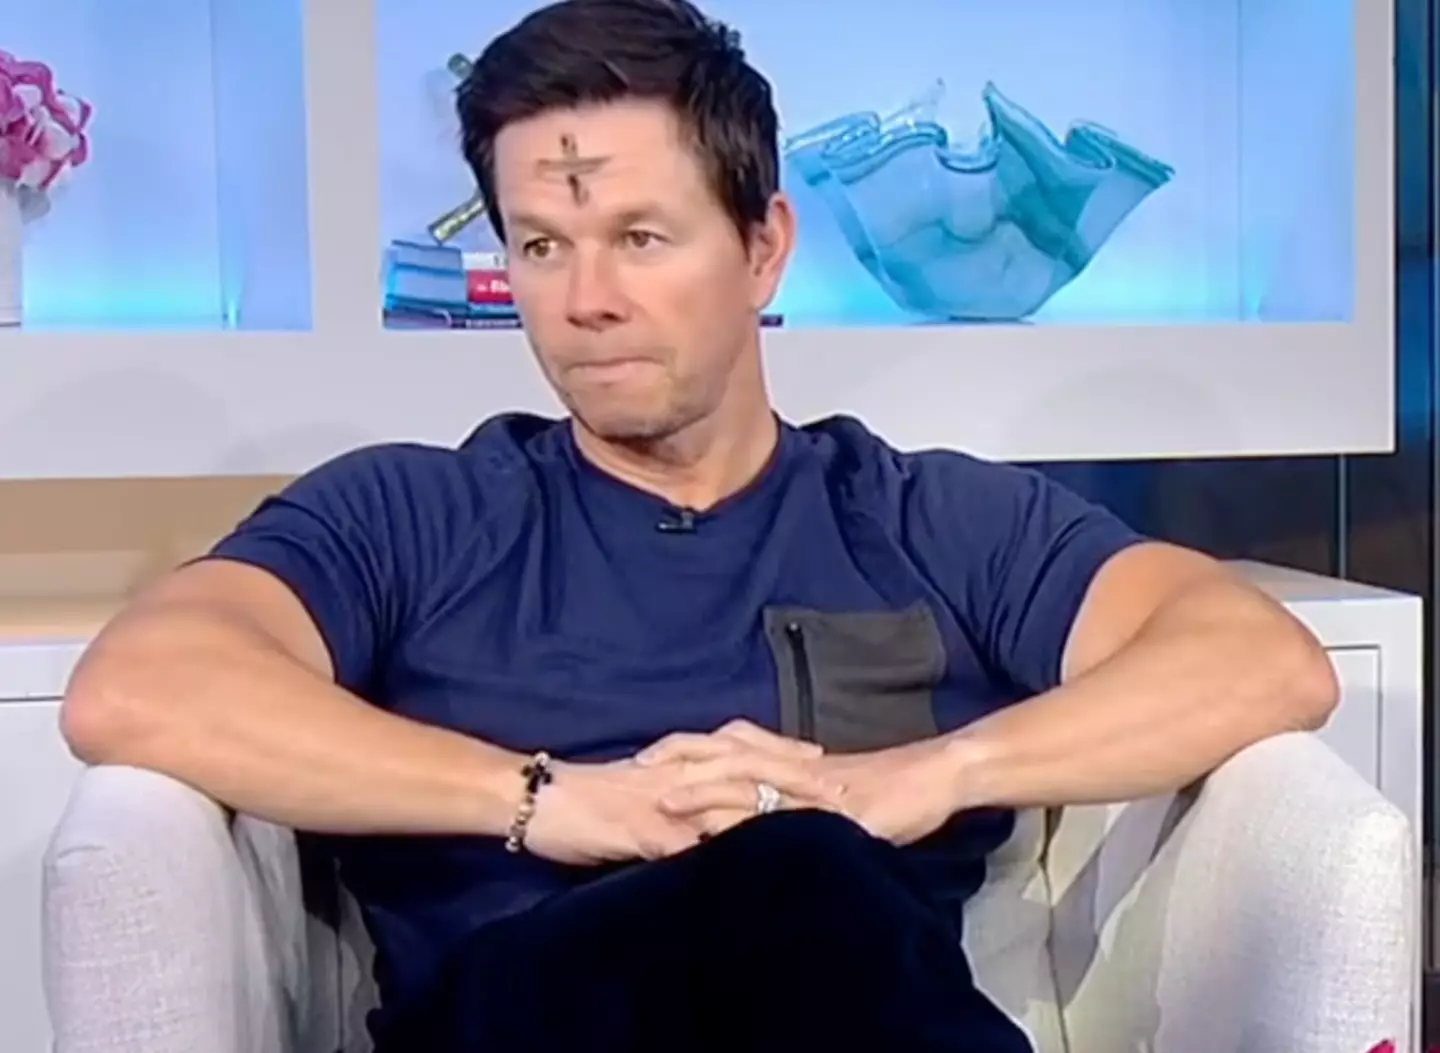 Mark Wahlberg wants to help people get closer to God.